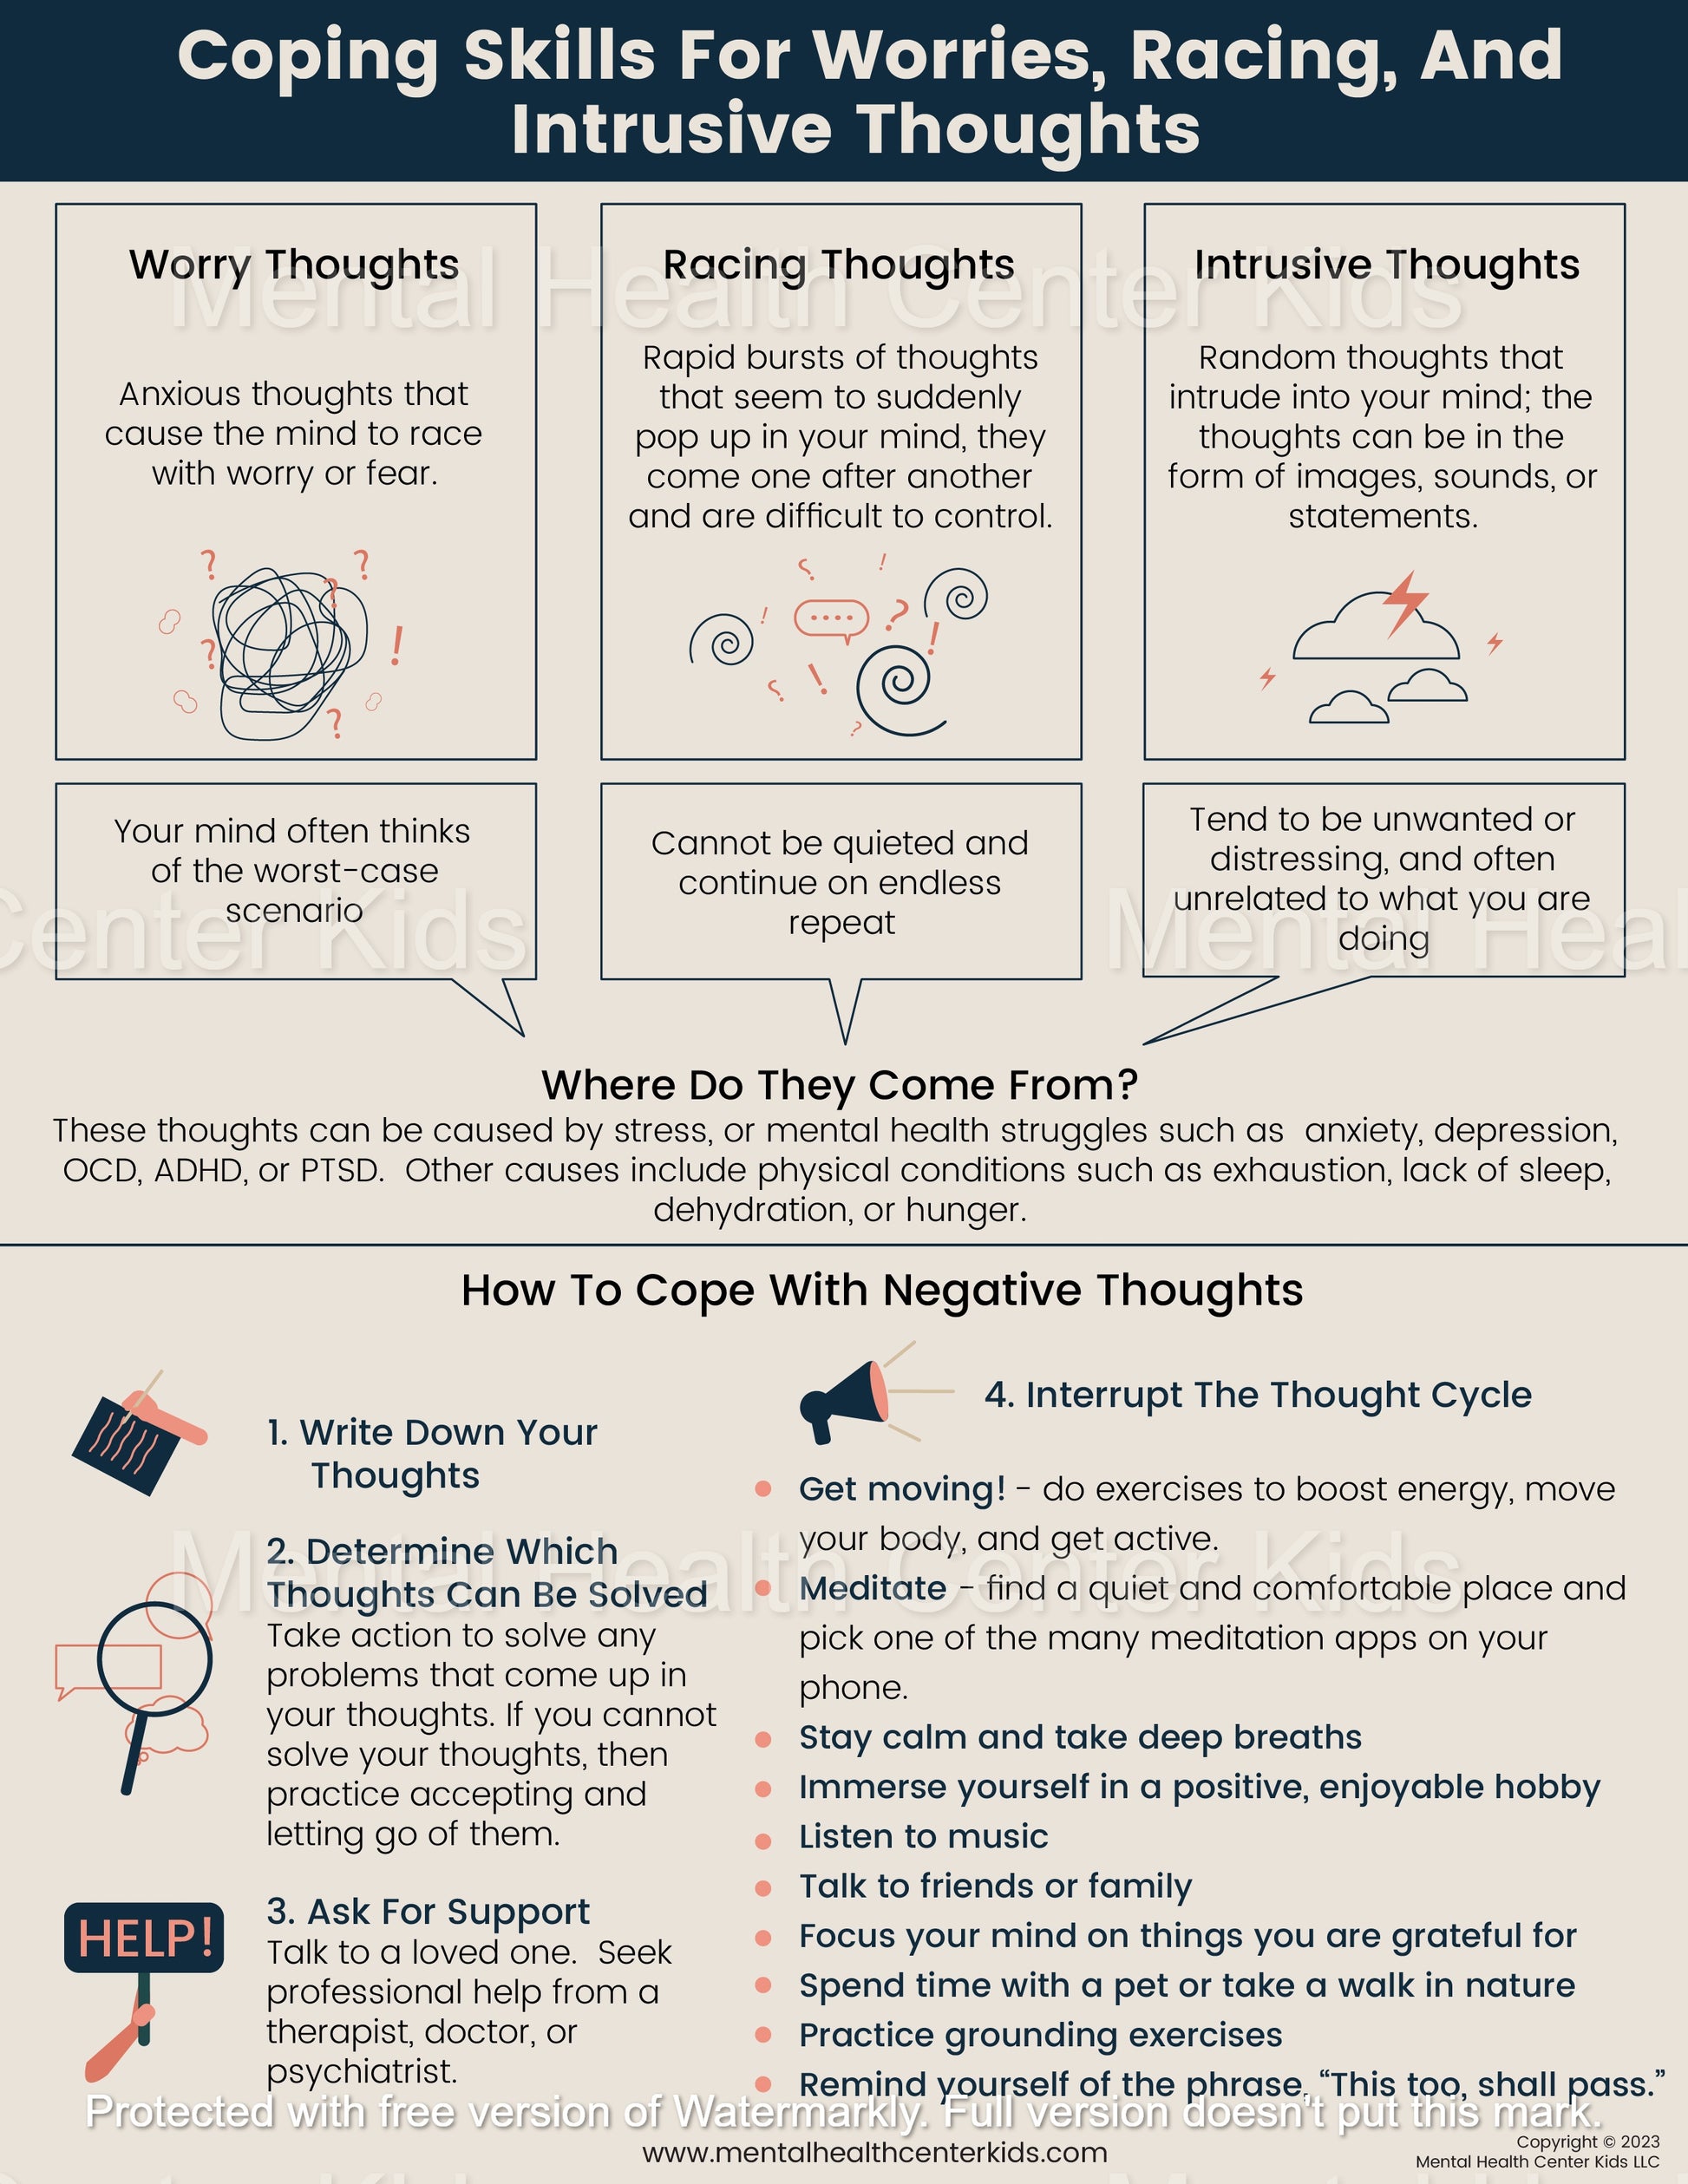 Coping Skills For Worries, Racing, And Intrusive Thoughts